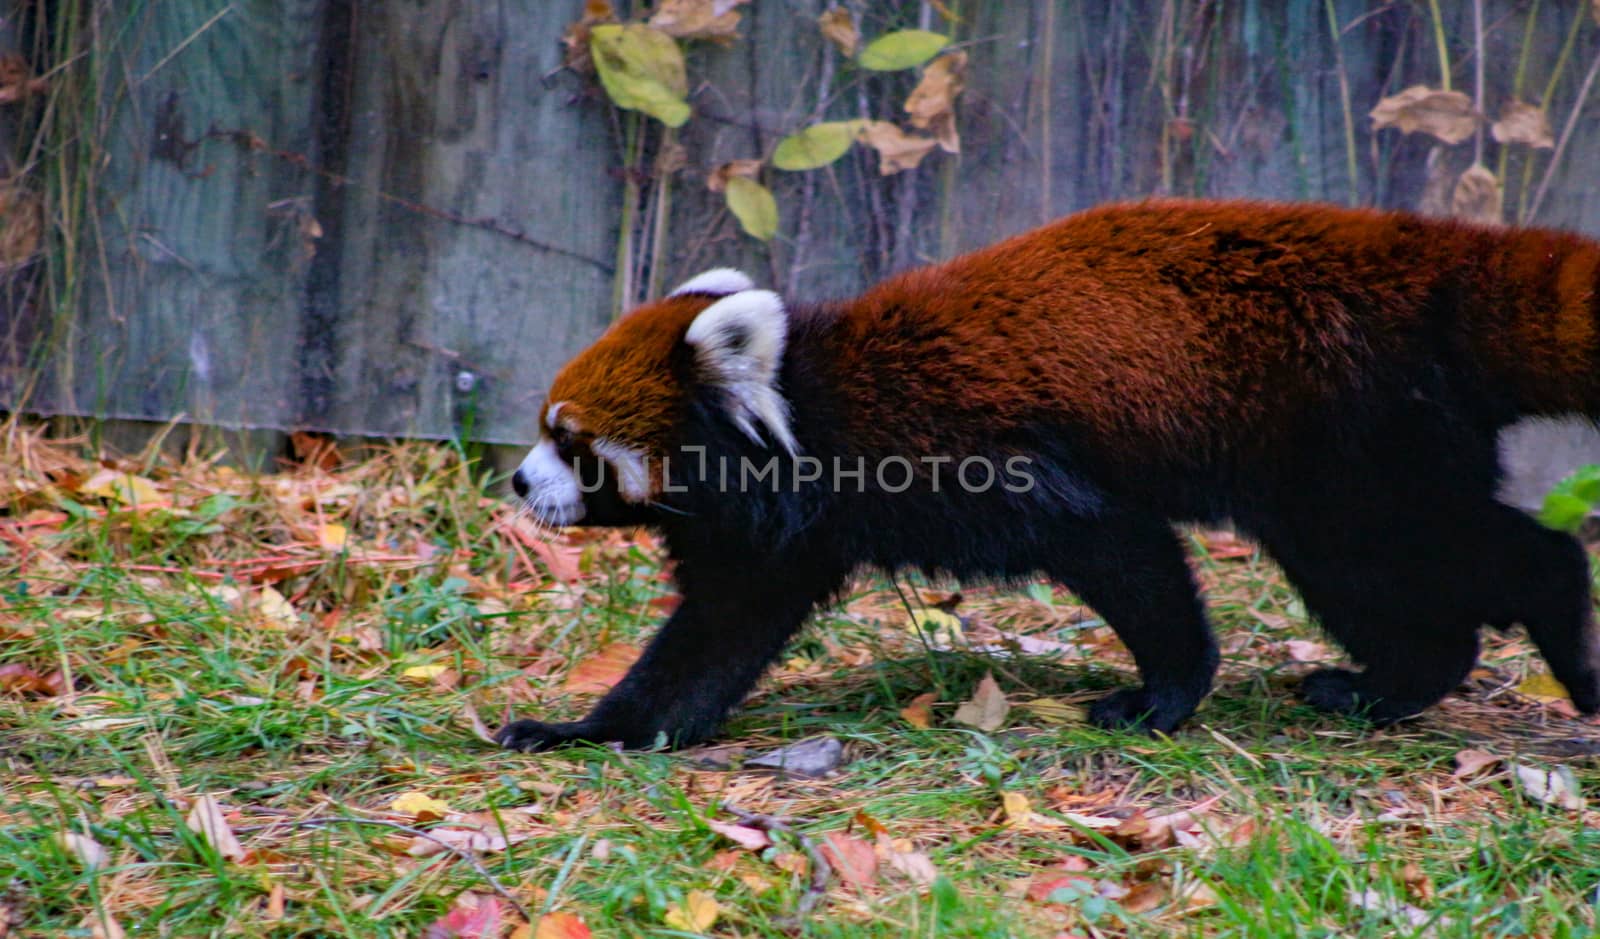 Red panda walking on the ground, close up photo shows the amazin by mynewturtle1